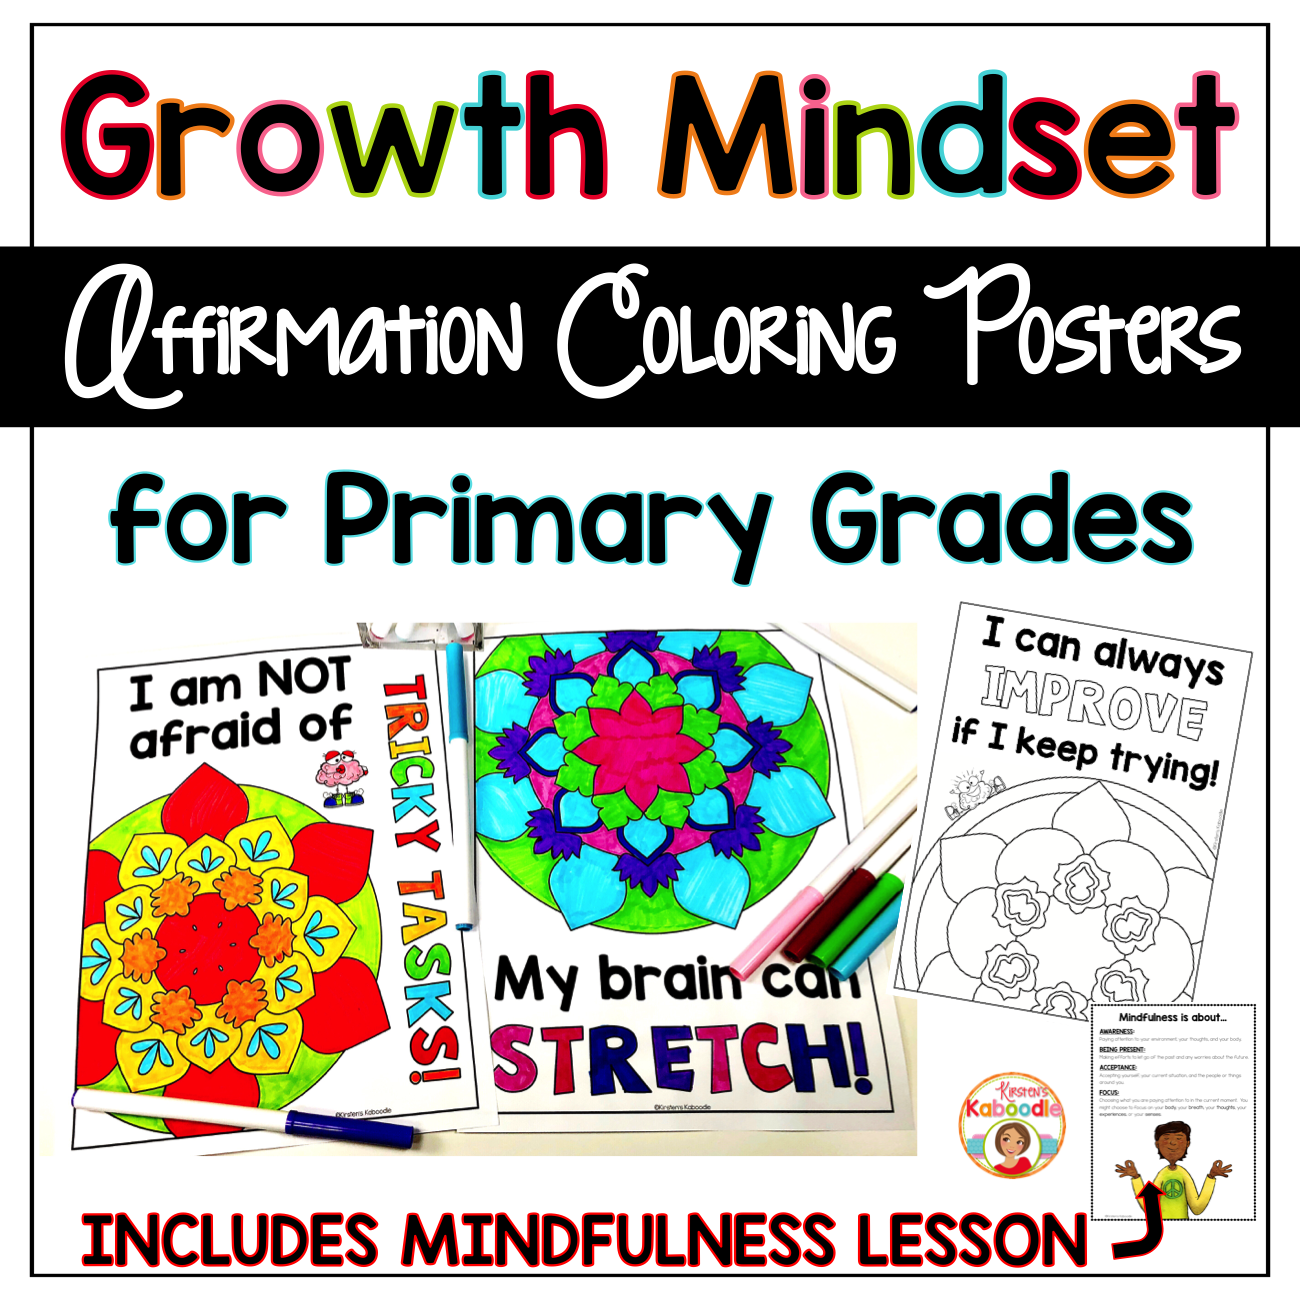 Growth Mindset Coloring Pages - Affirmations for Lower Grades